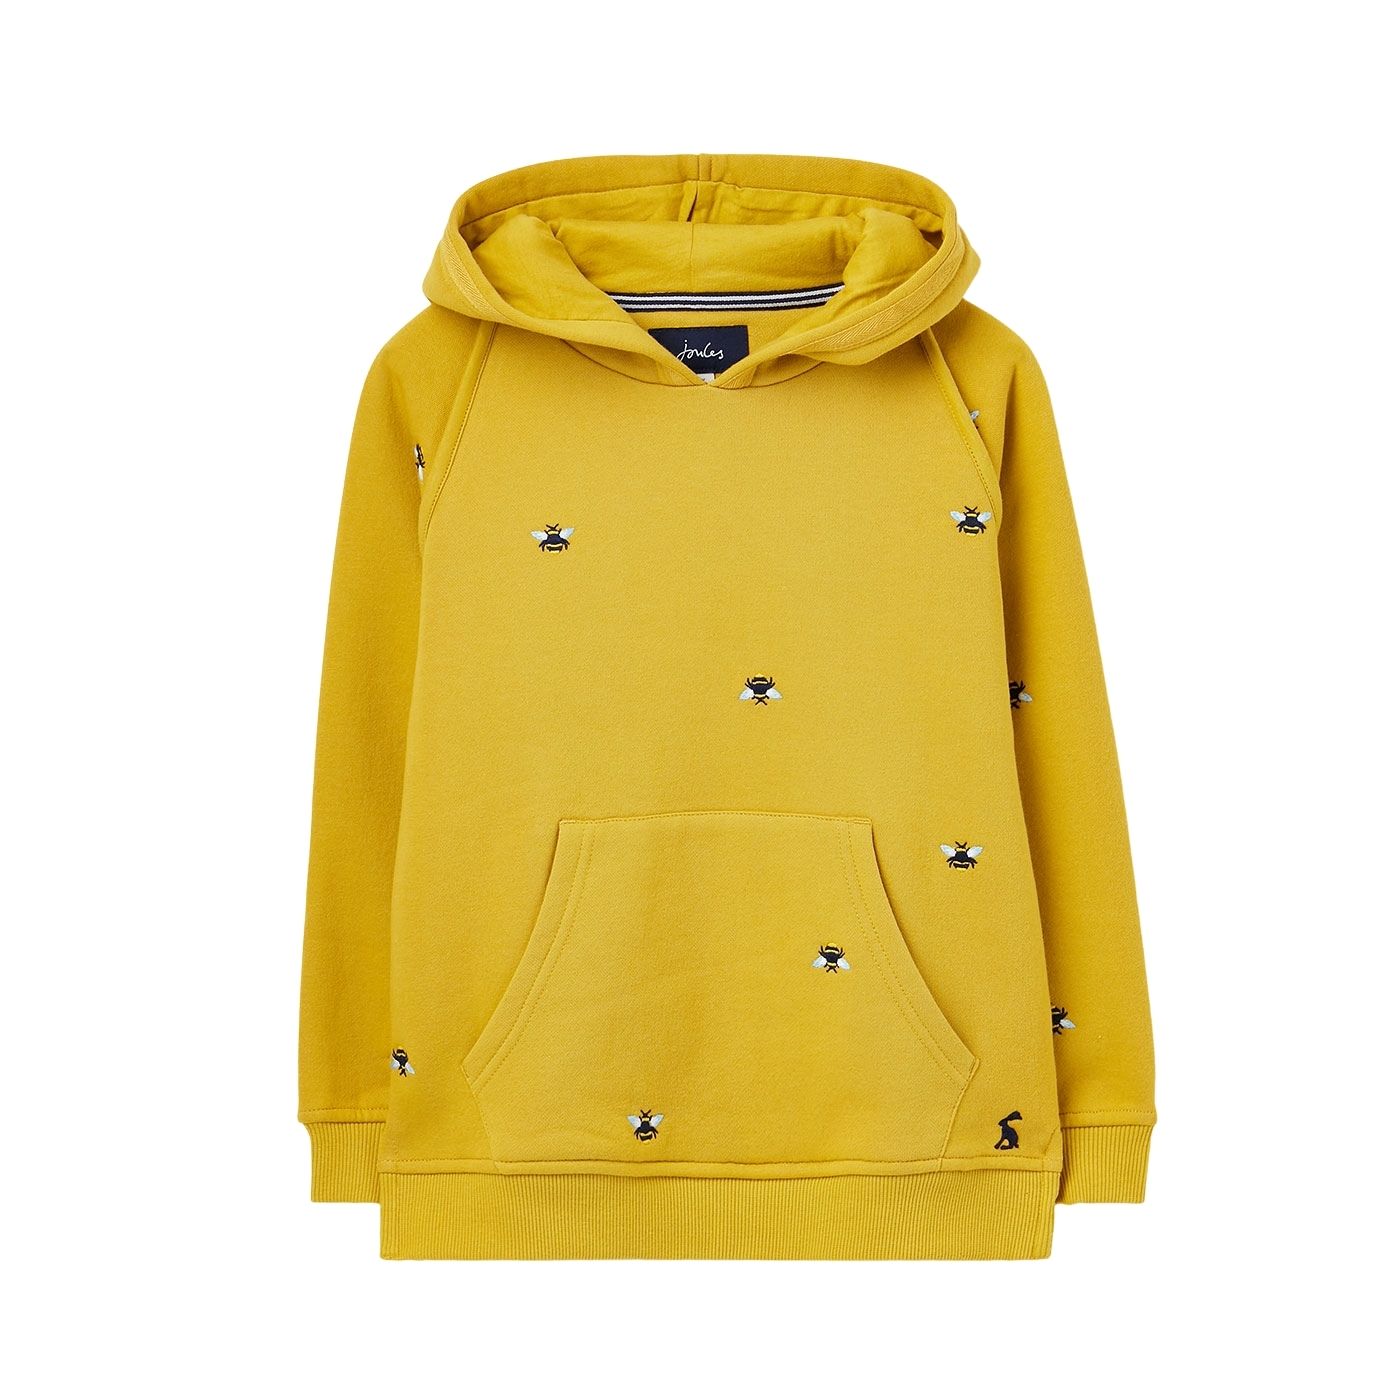 Joules Lucas Raglan Sleeve Hooded Jumper - Yellow Bees Embroidery